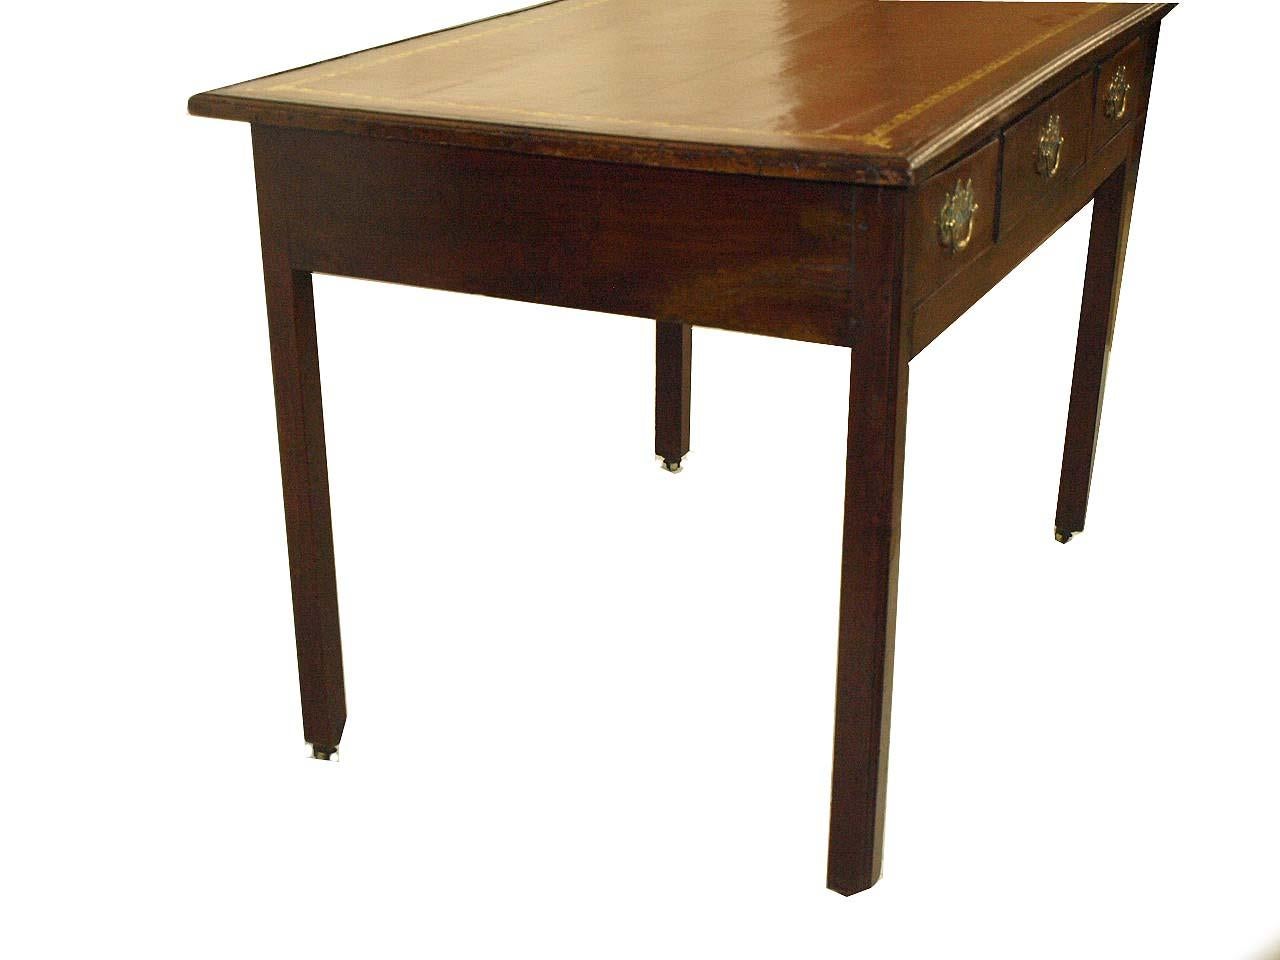 English Chippendale mahogany leather top table, the three drawers with mahogany secondary wood and retaining their original open fretwork brass pulls. The straight legs with molded front outer edge and chamfered back inner edge terminating with